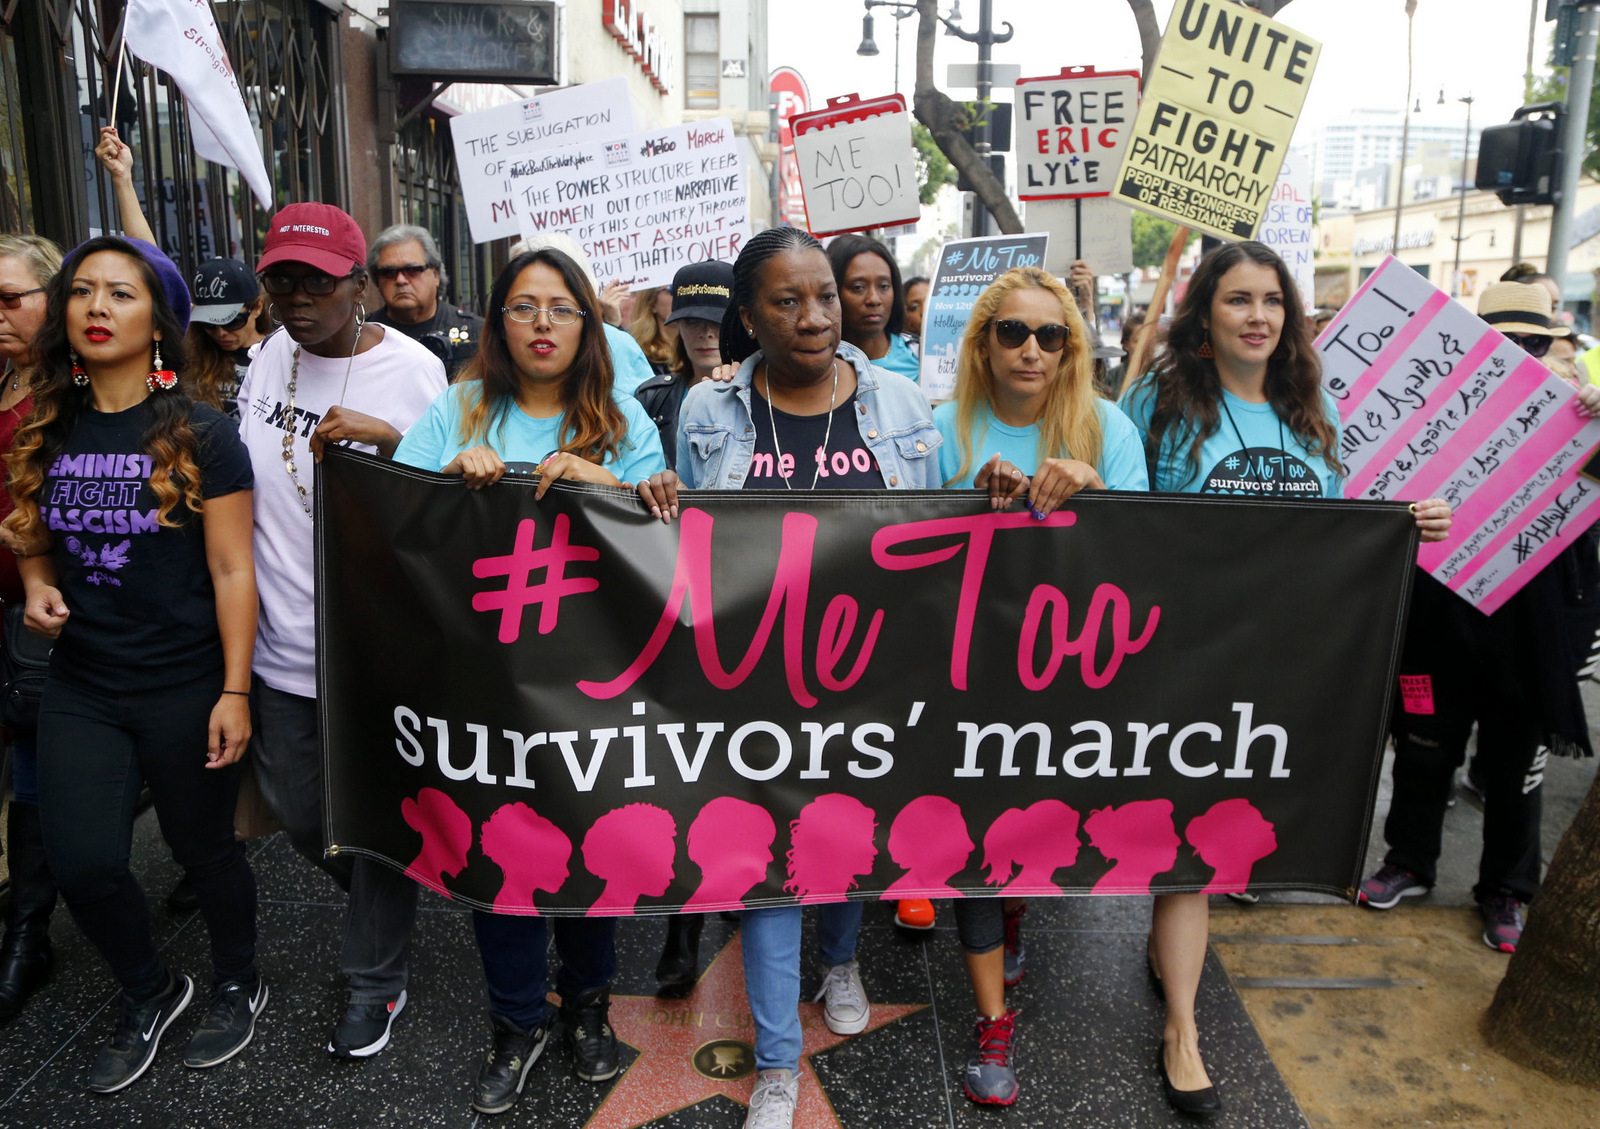 Participants march against sexual assault and harassment at the #MeToo March in Los Angeles on, Nov. 12, 2017. (AP/Damian Dovarganes)